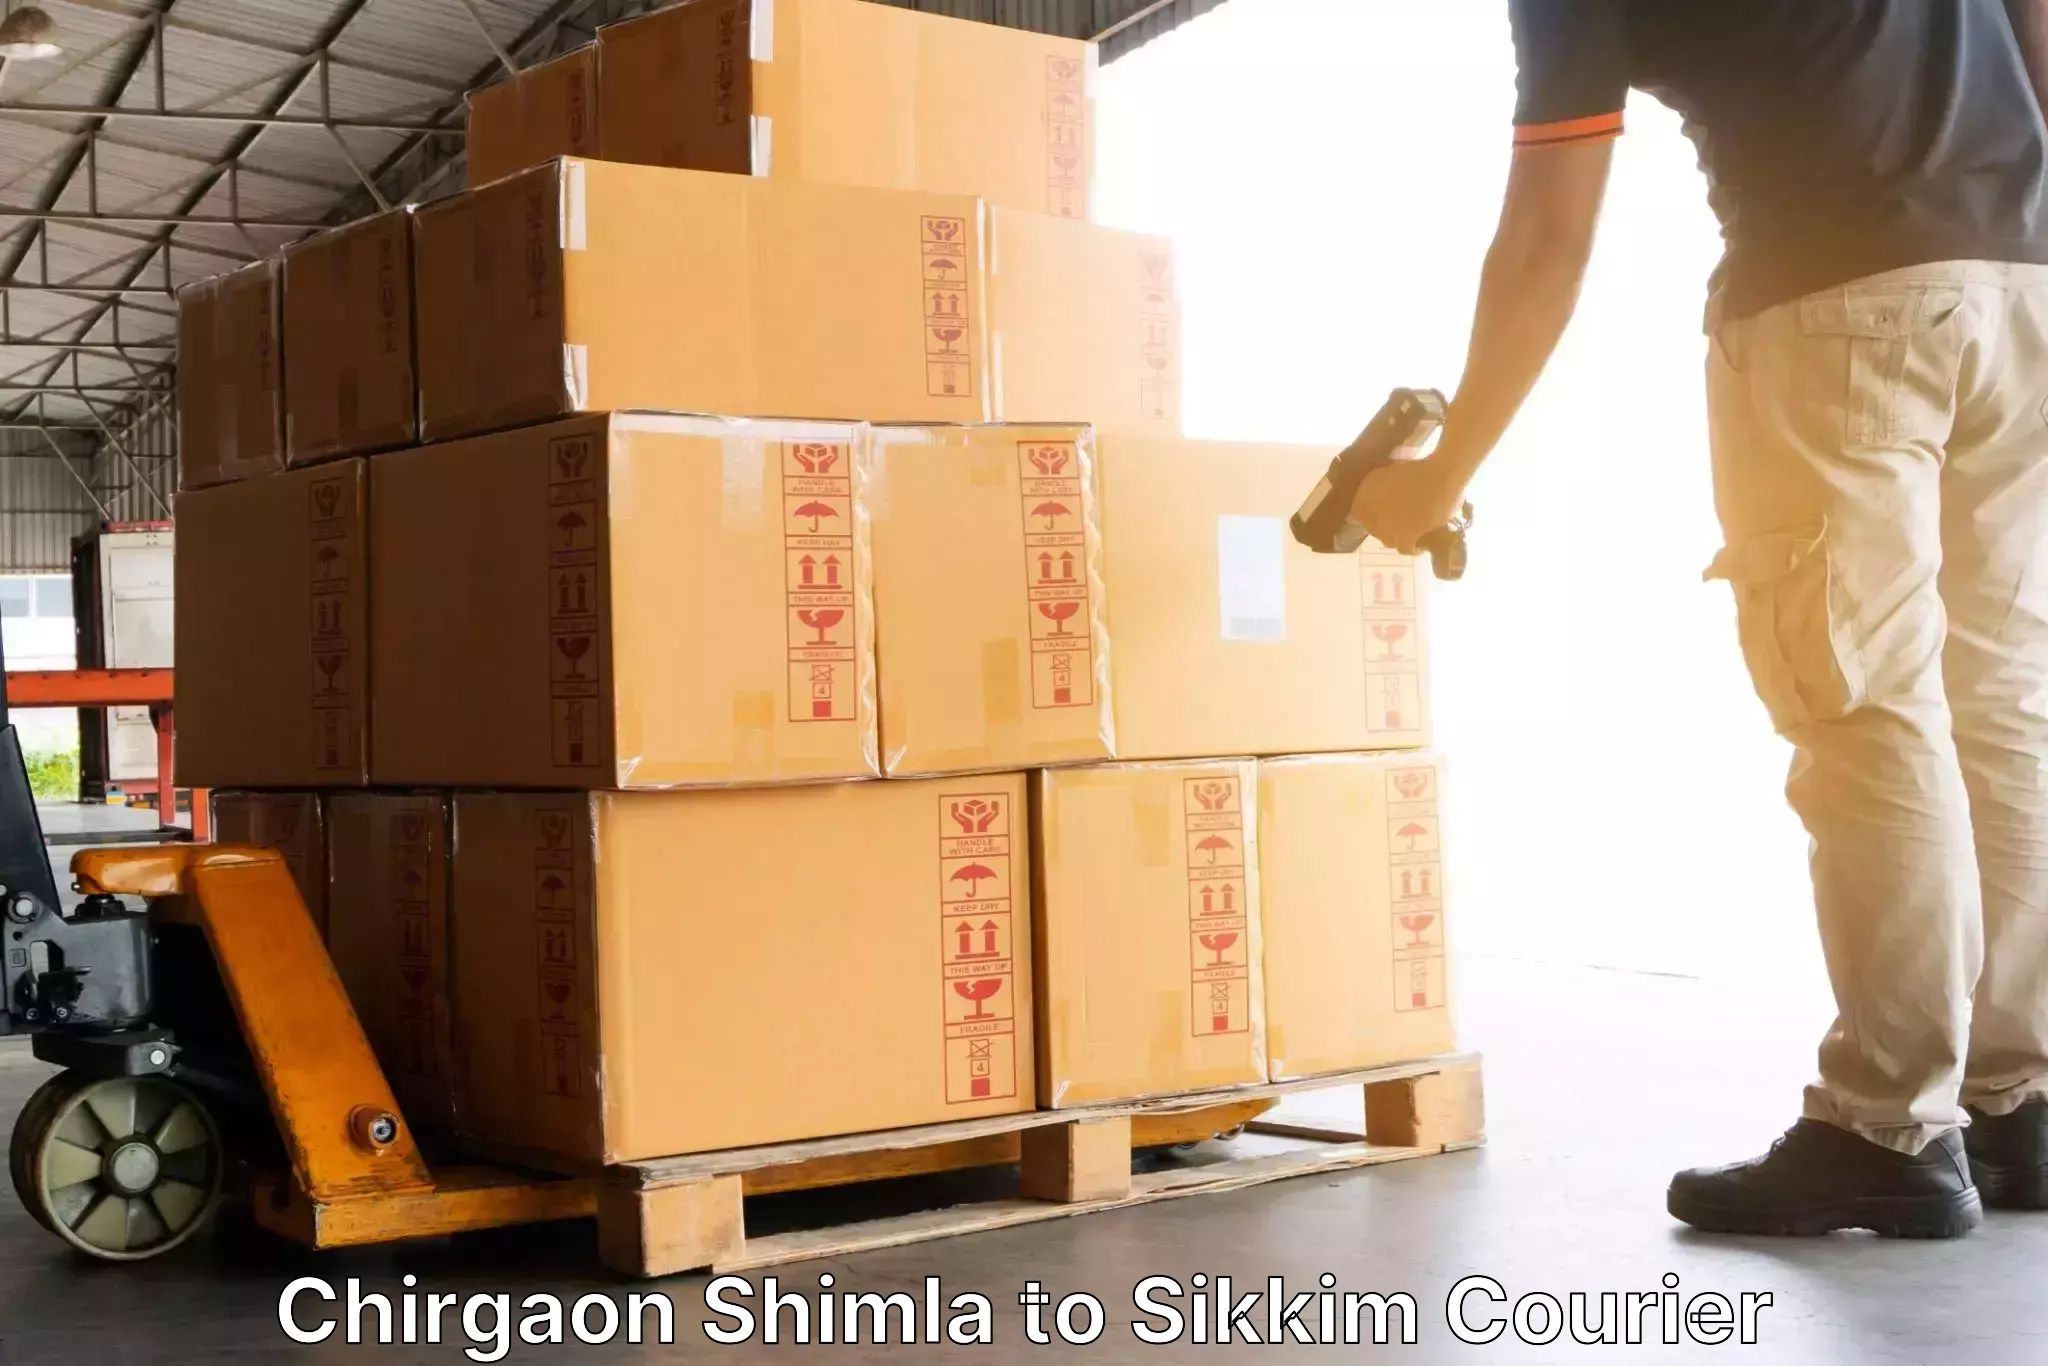 Pharmaceutical courier Chirgaon Shimla to Pelling